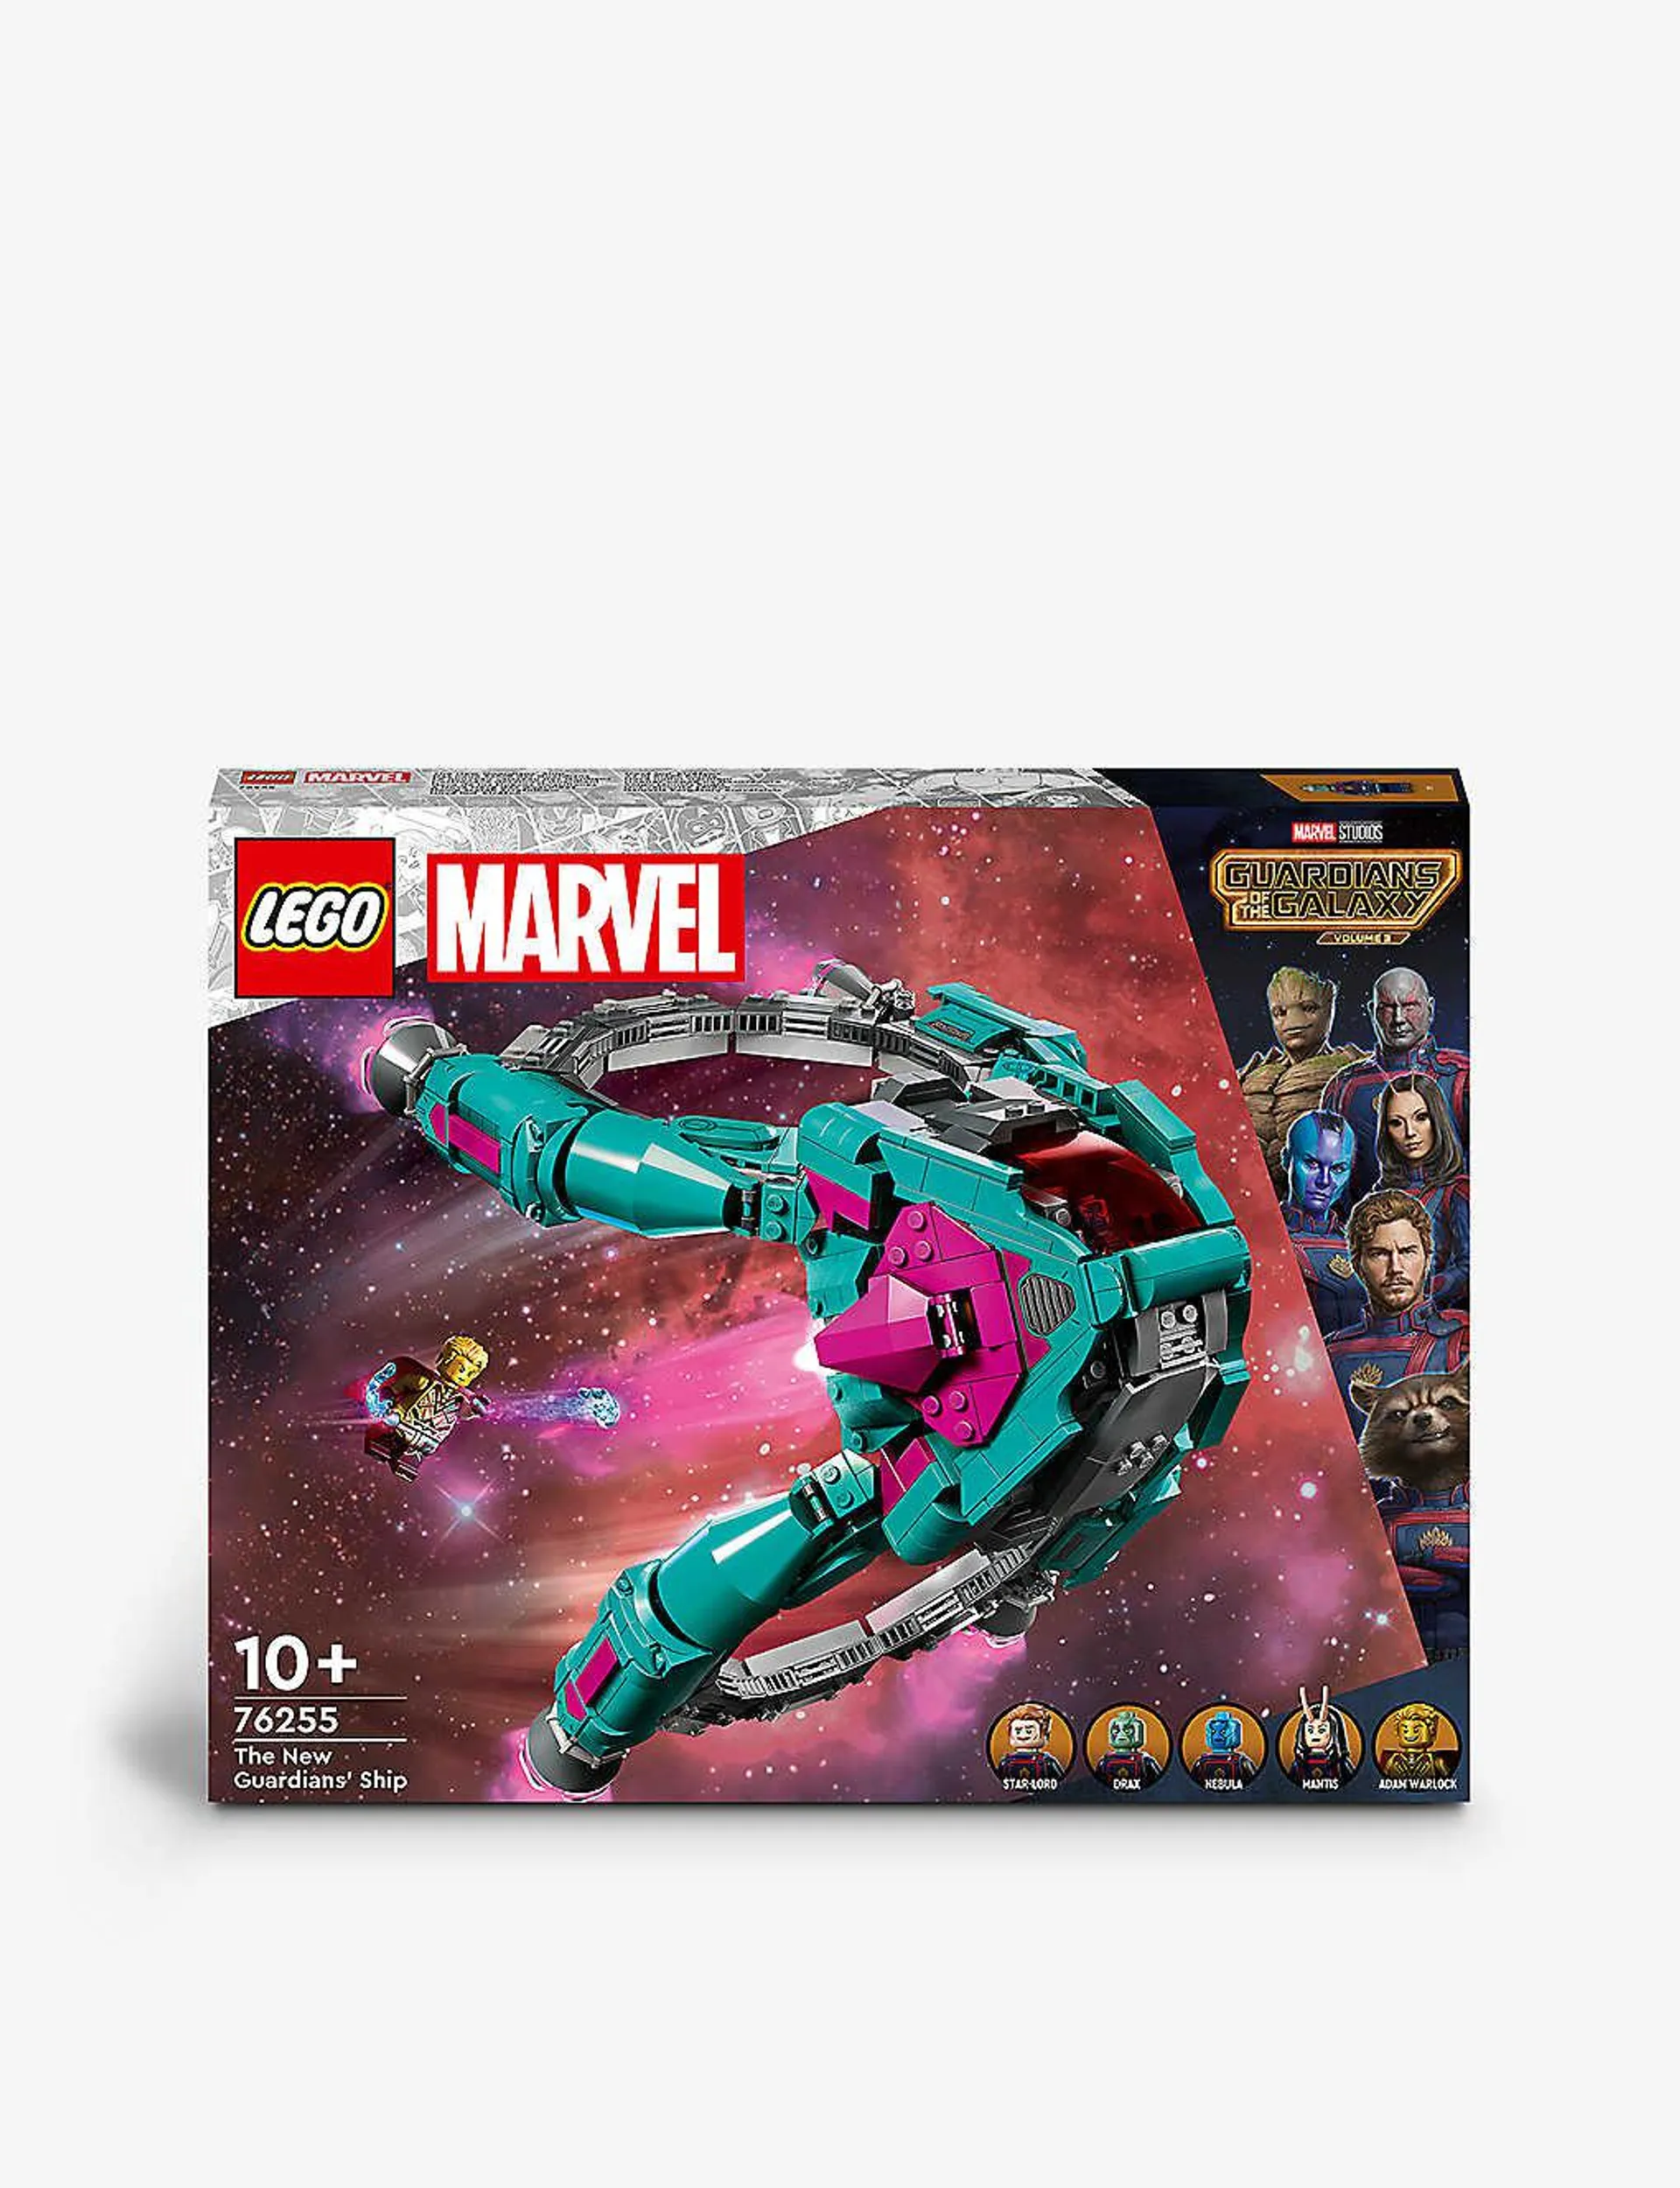 LEGO® Marvel 76255 The New Guardians’ Ship playset